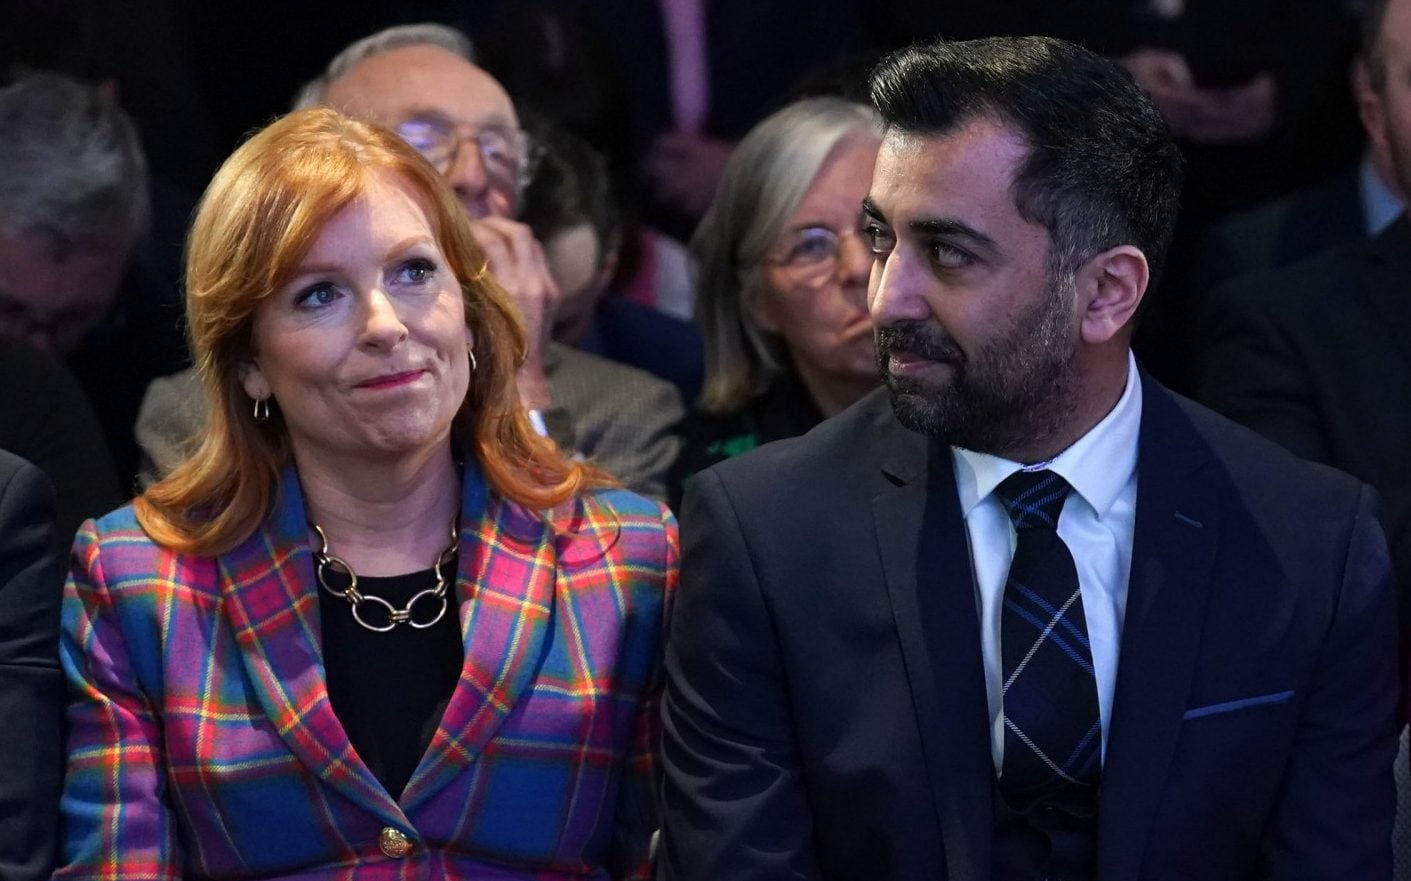 humza yousaf asks to meet snp defector as he scrambles for no-confidence vote support